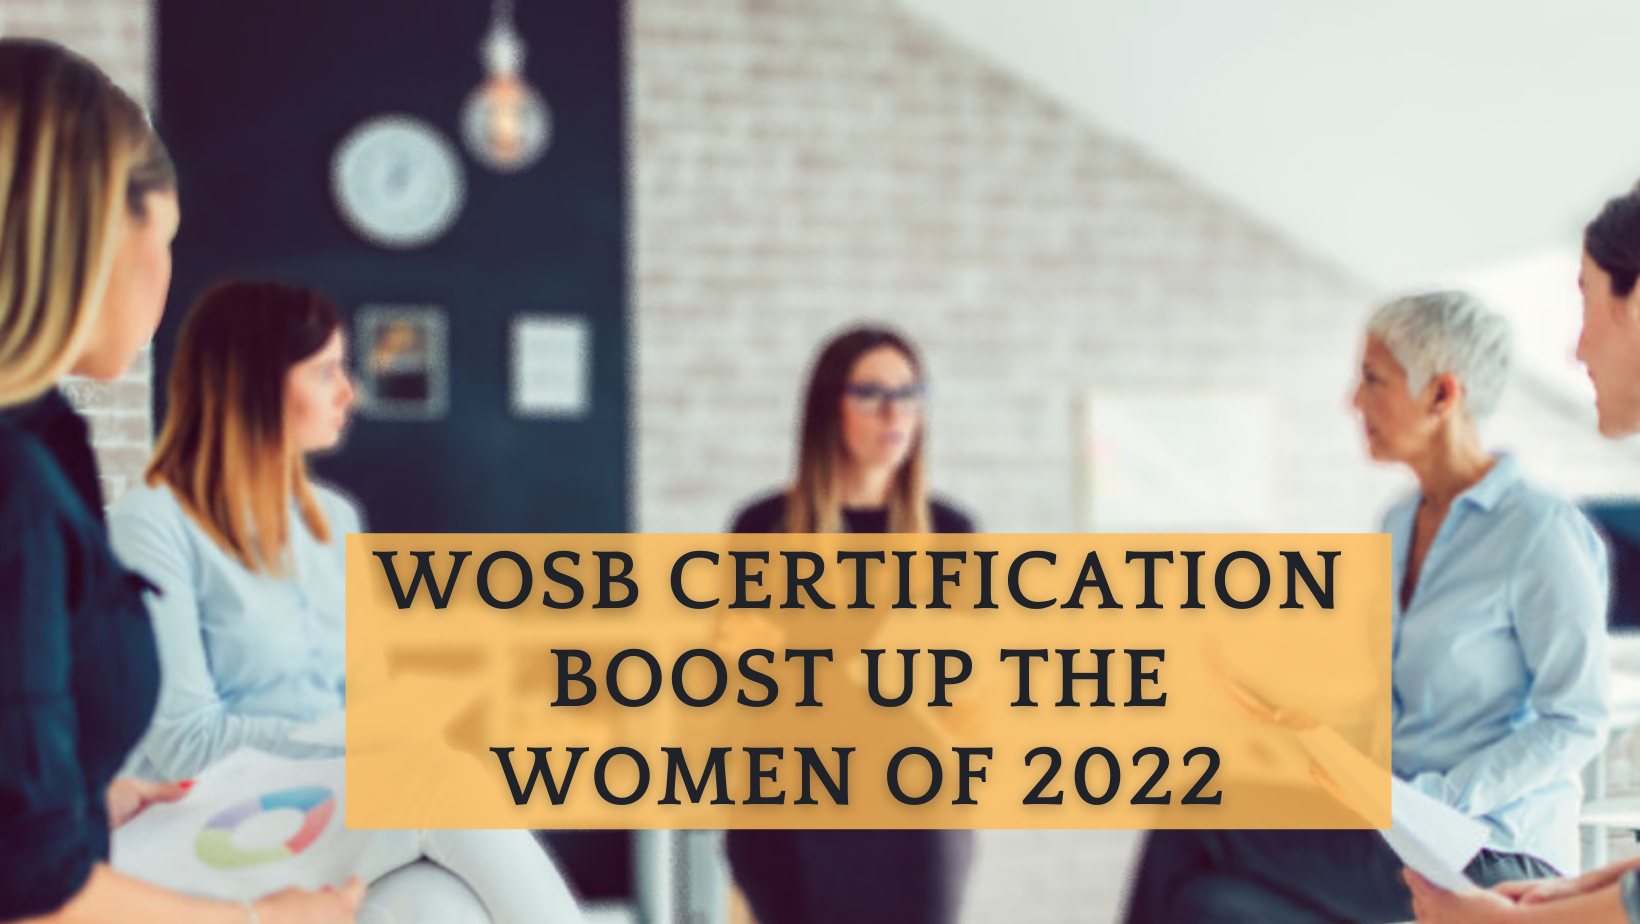 WOSB Certification: Boost up the Women of 2022